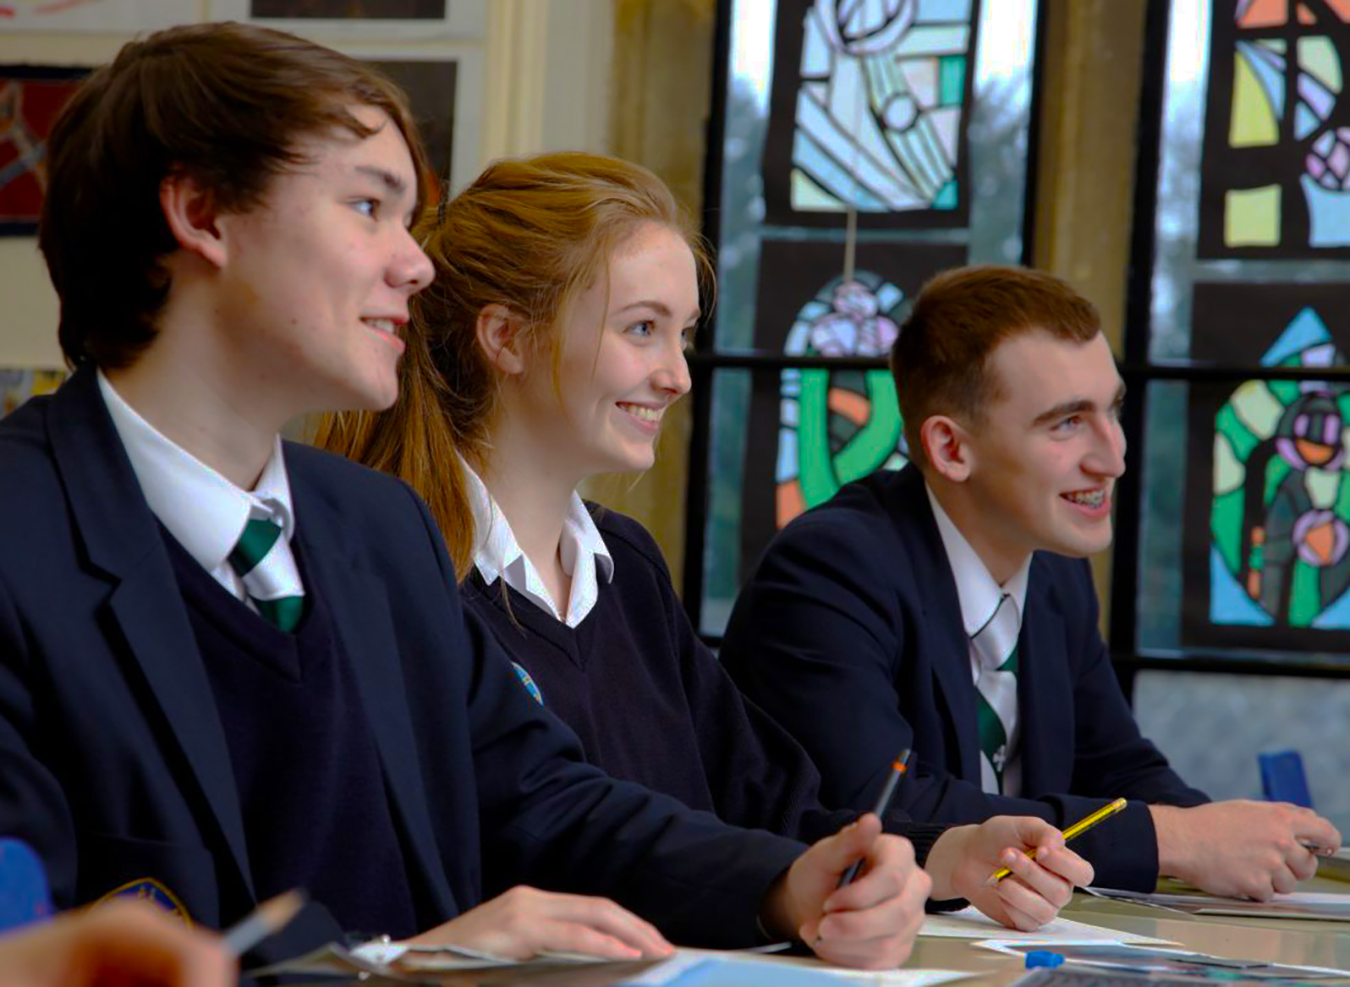 Photograph of Sixth Form students at Durham School in the UK